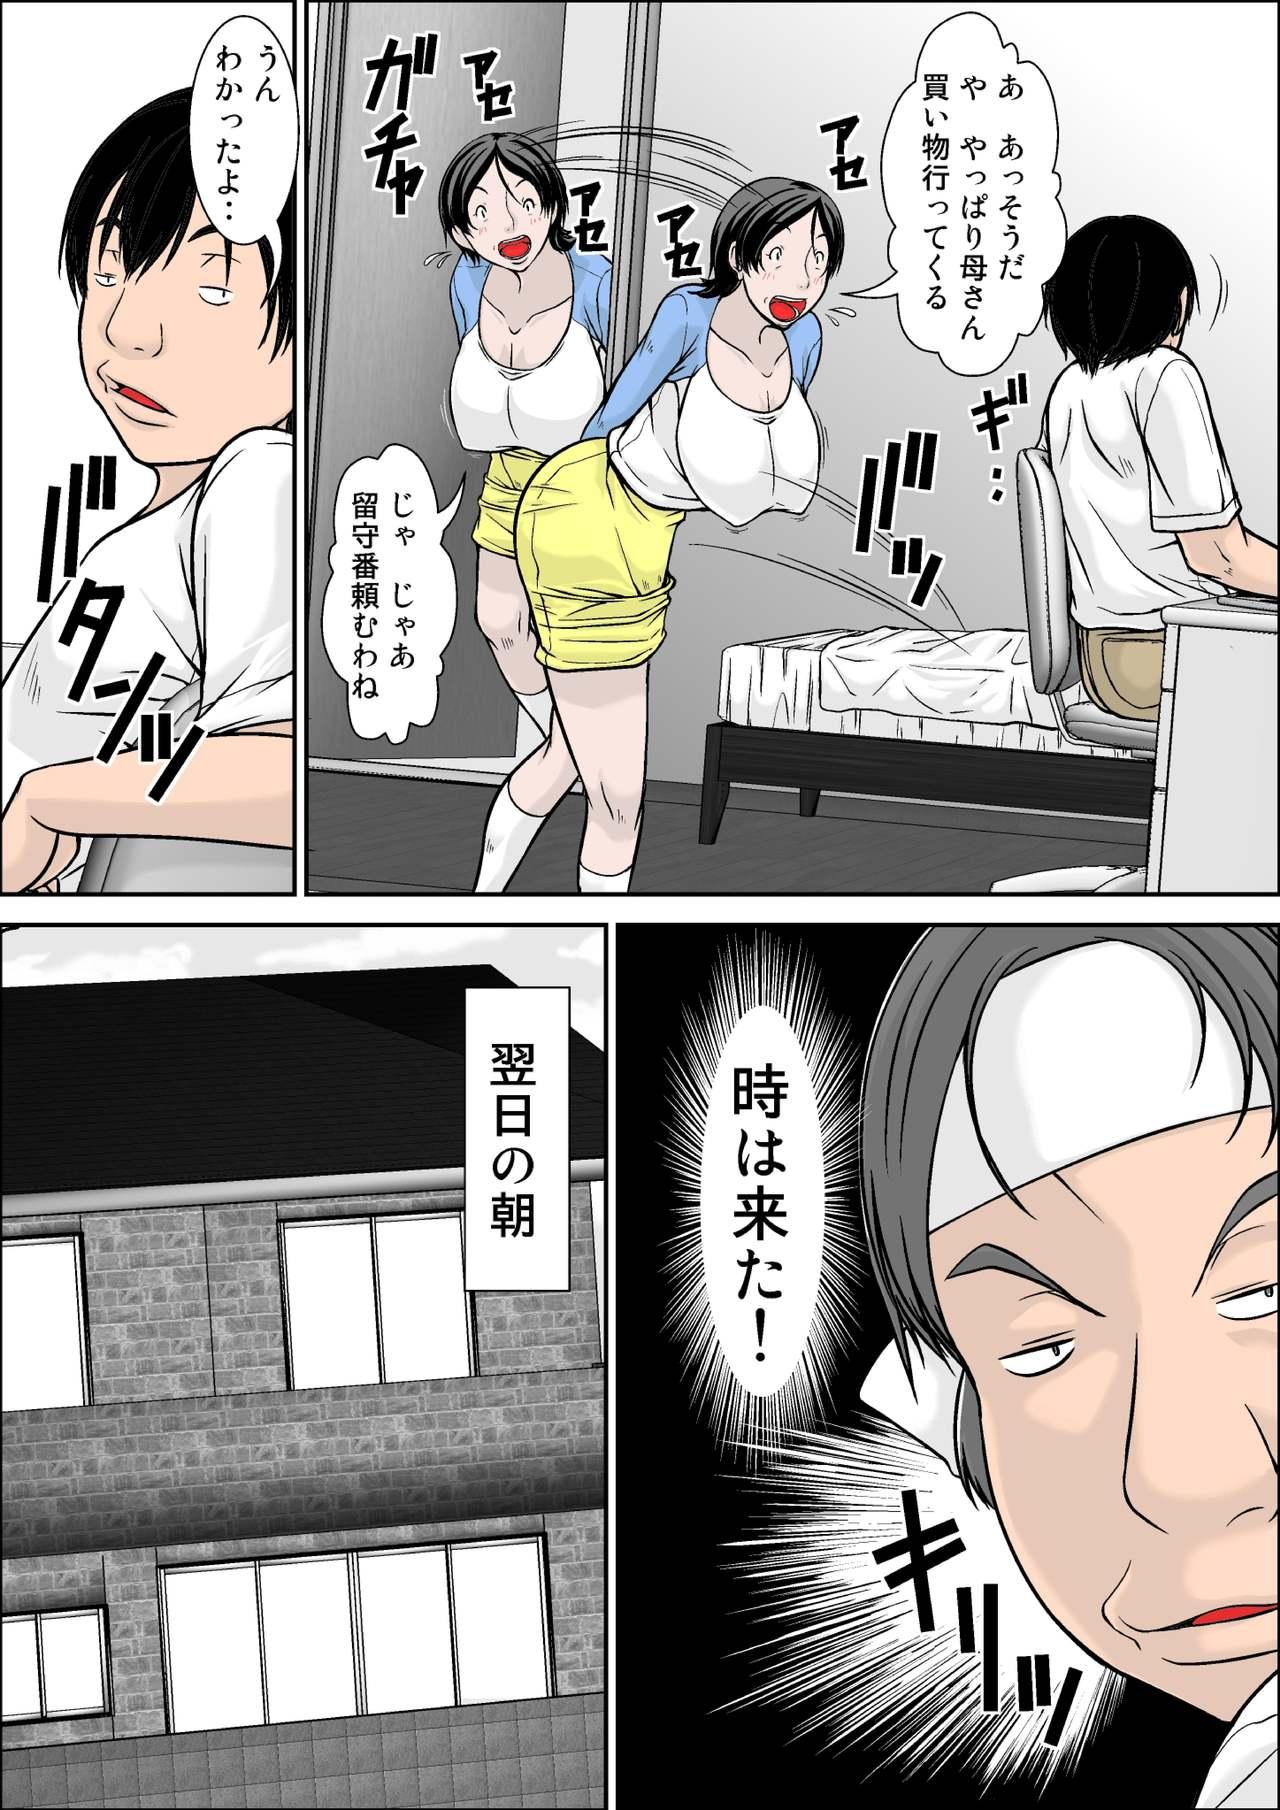 Hey! It is said that I urge you mother and will do what! ... mother Hatsujou - 1st part 10